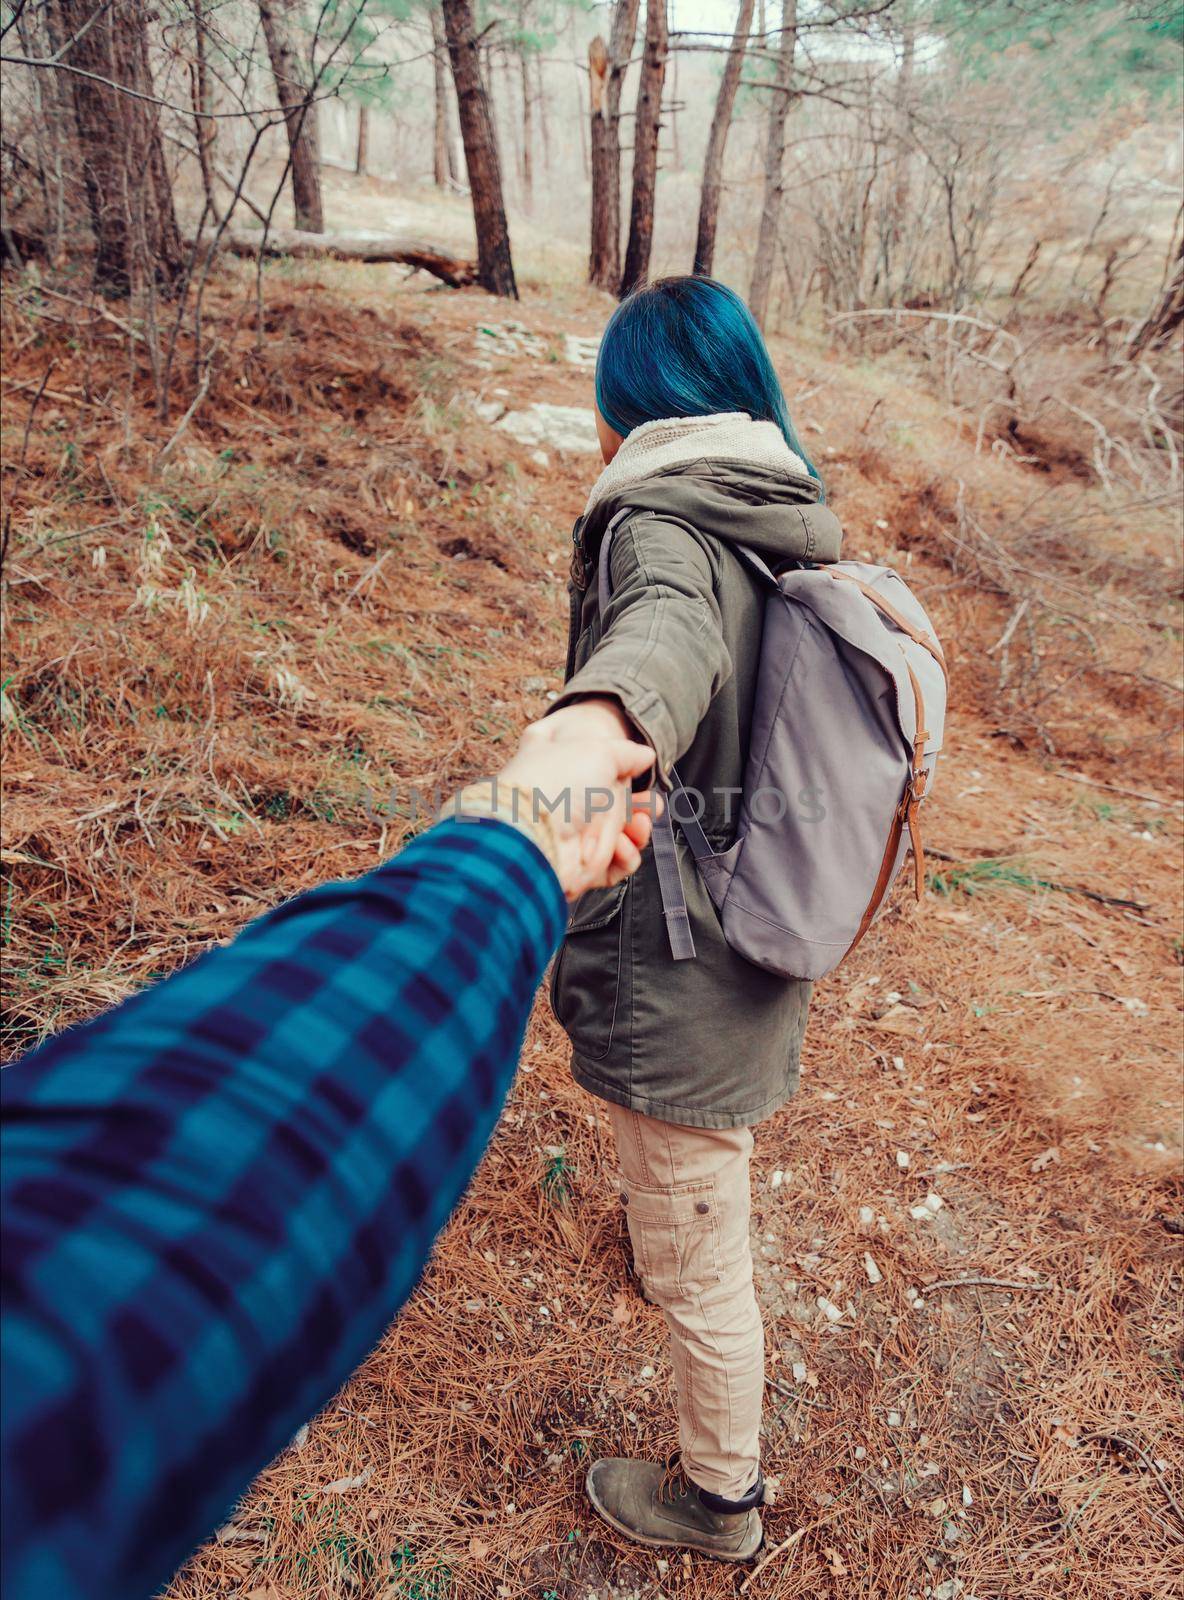 Hiker young woman with backpack holding man's hand and leading him in the forest outdoor. Point of view shot